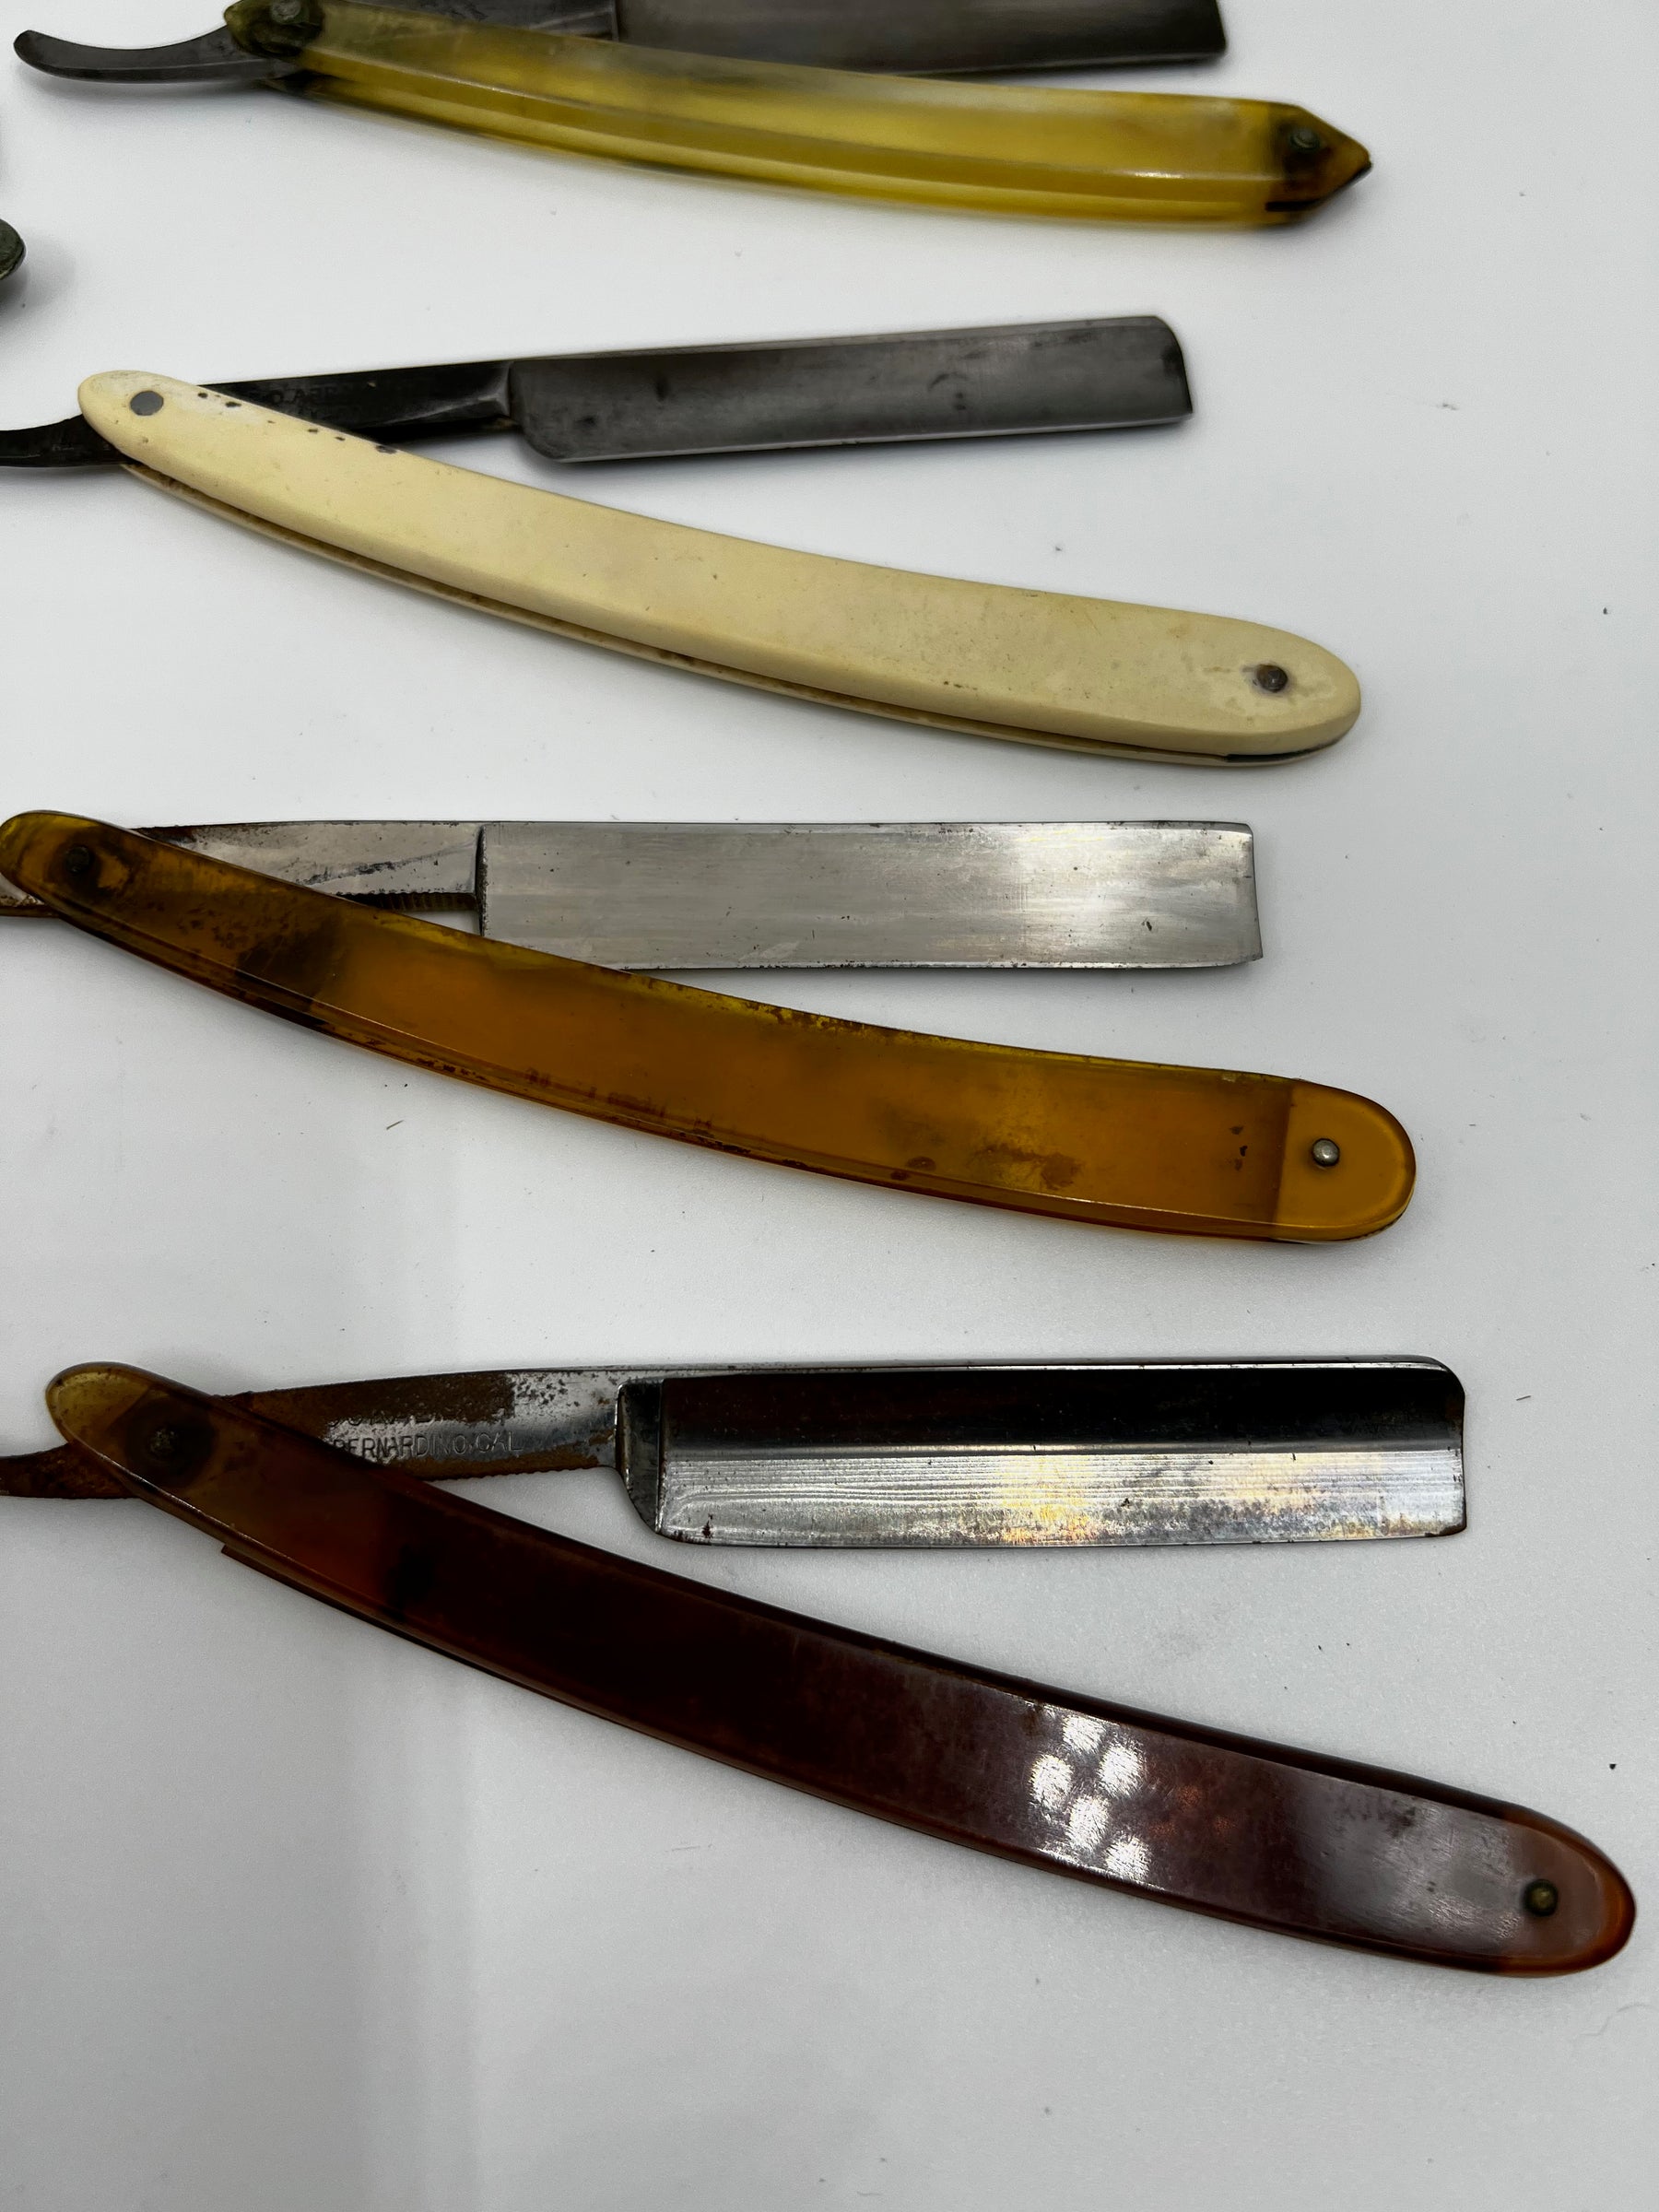 Vintage 10 Straight Razor Lot #7 - May Contain Sheffield, Solingen, Japanese & USA makers, as pictured